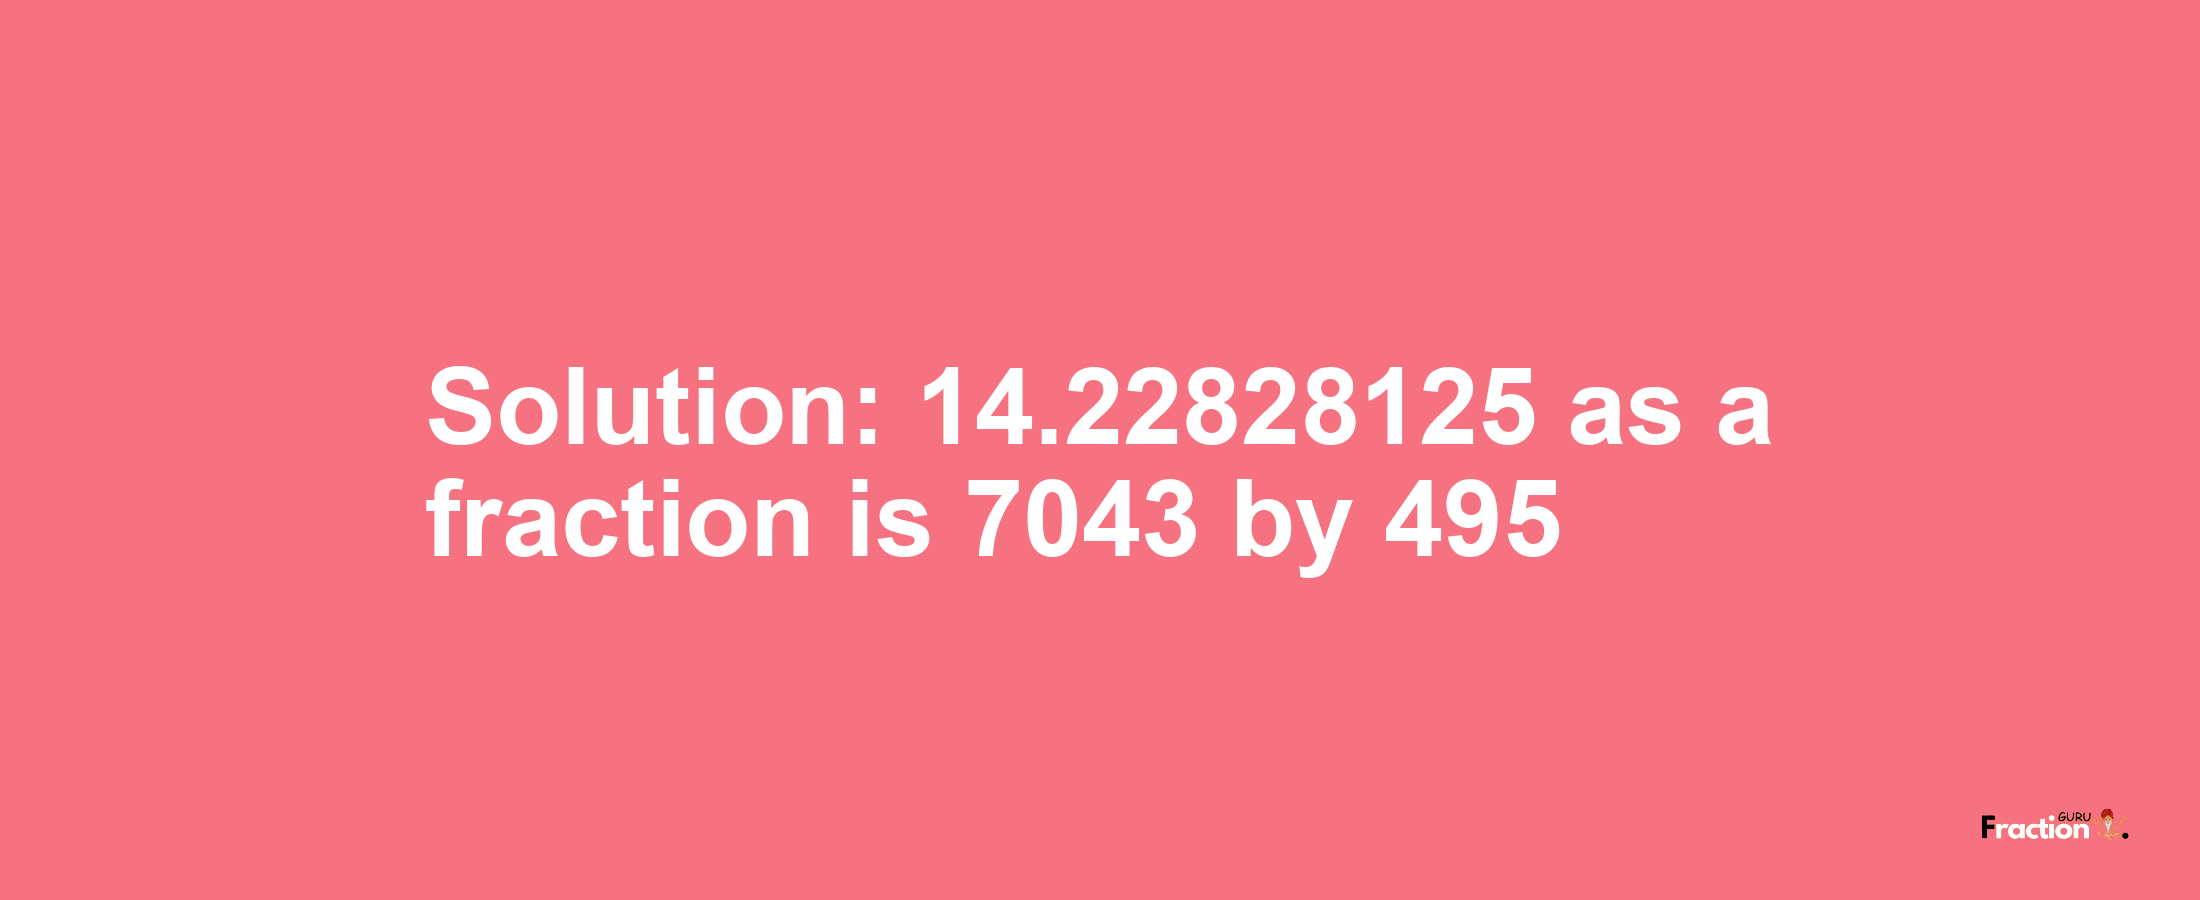 Solution:14.22828125 as a fraction is 7043/495